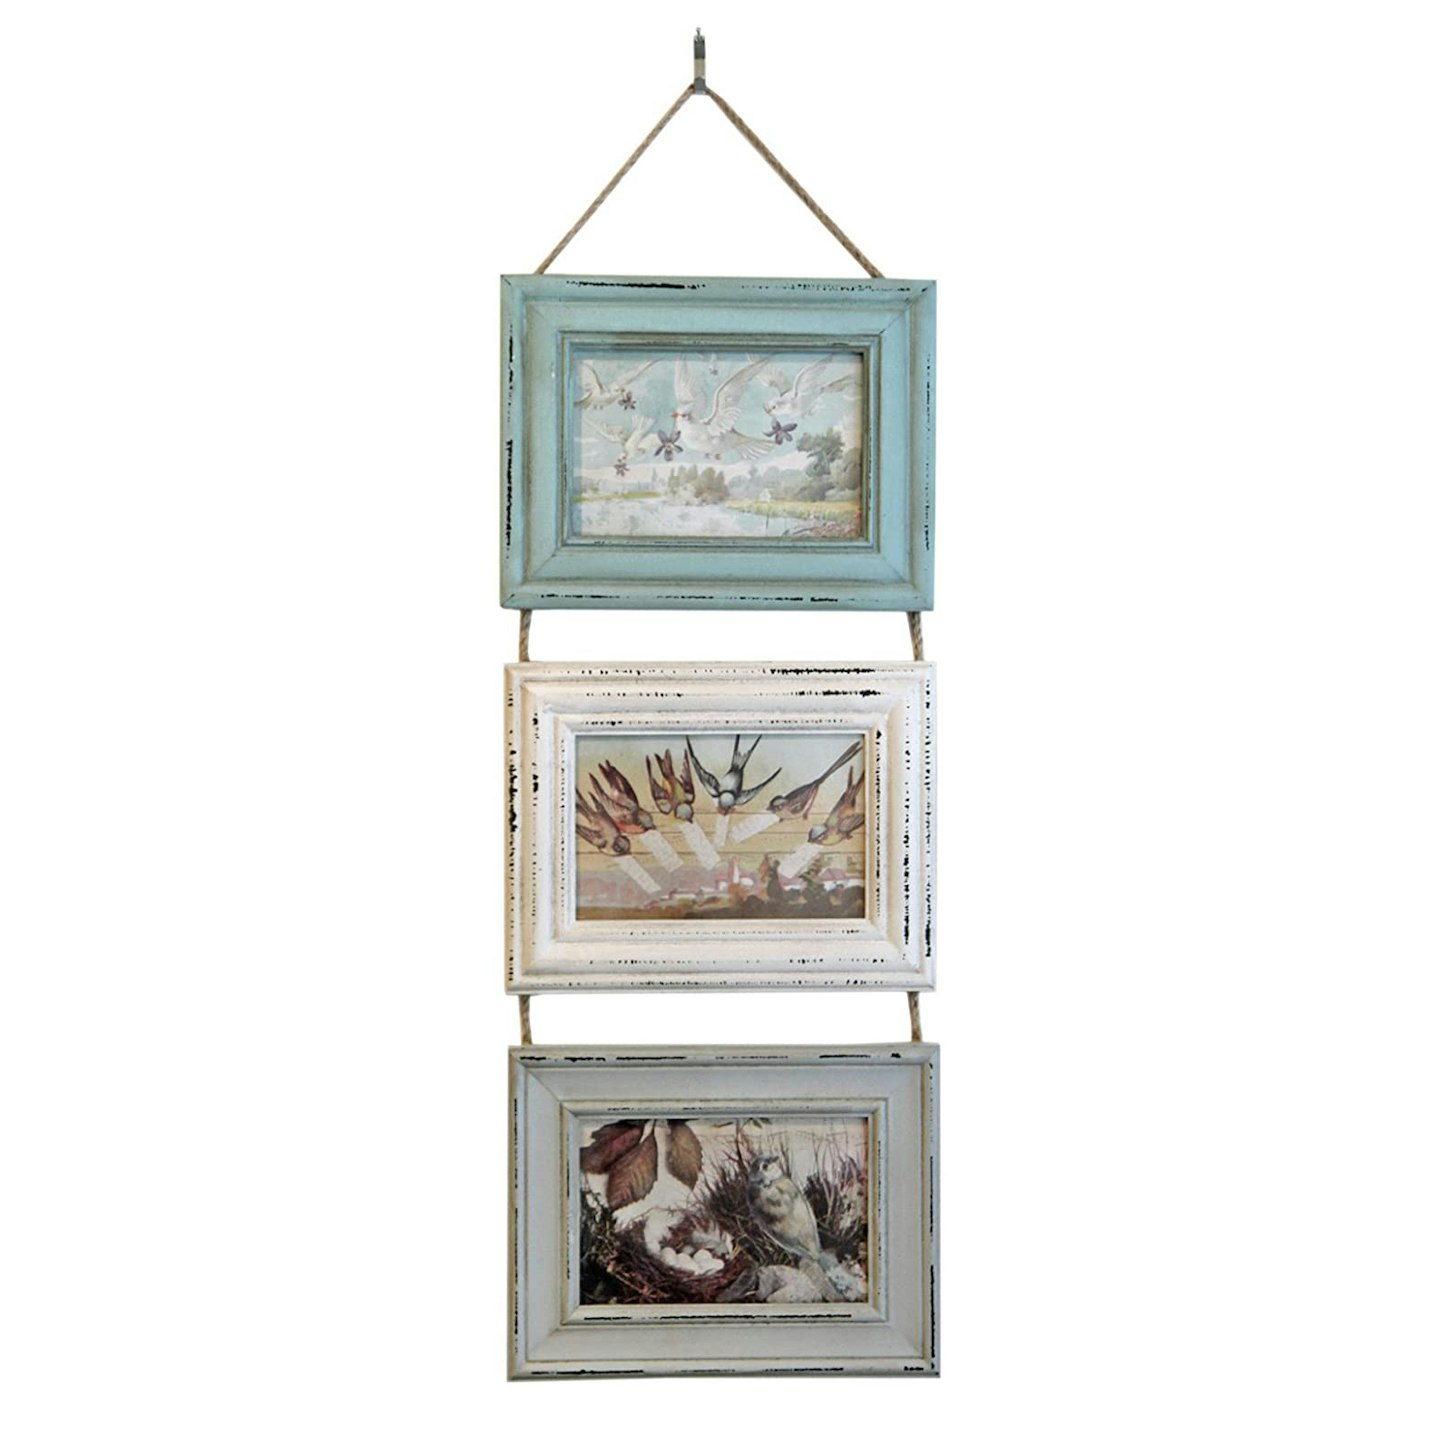 Just Contempo Rustic Triple Hanging Photo Frame - Green, Blue and Grey